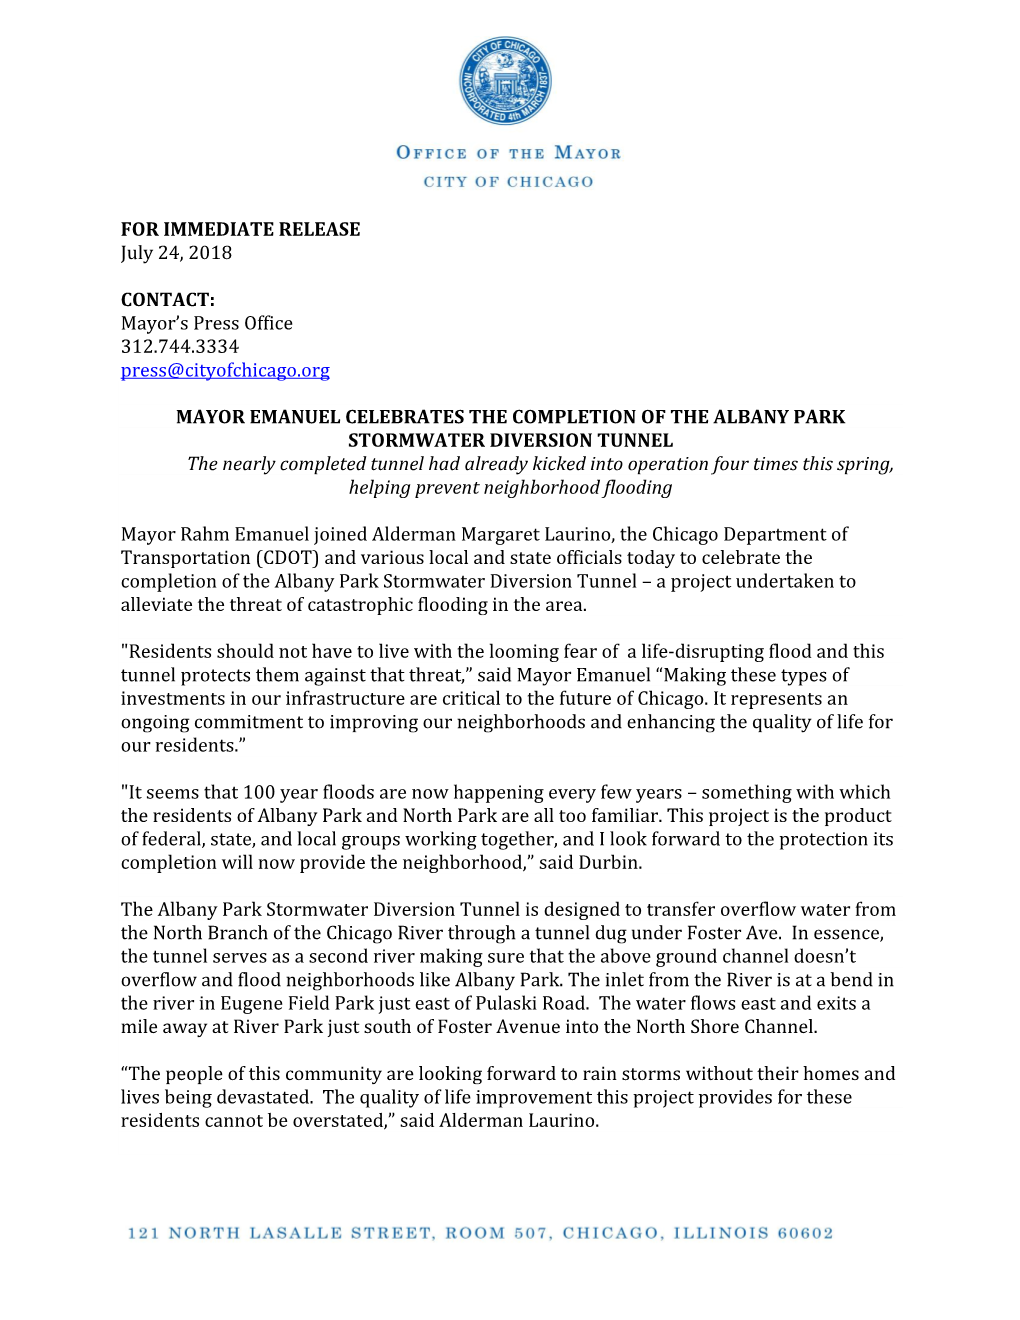 FOR IMMEDIATE RELEASE July 24, 2018 CONTACT: Mayor's Press